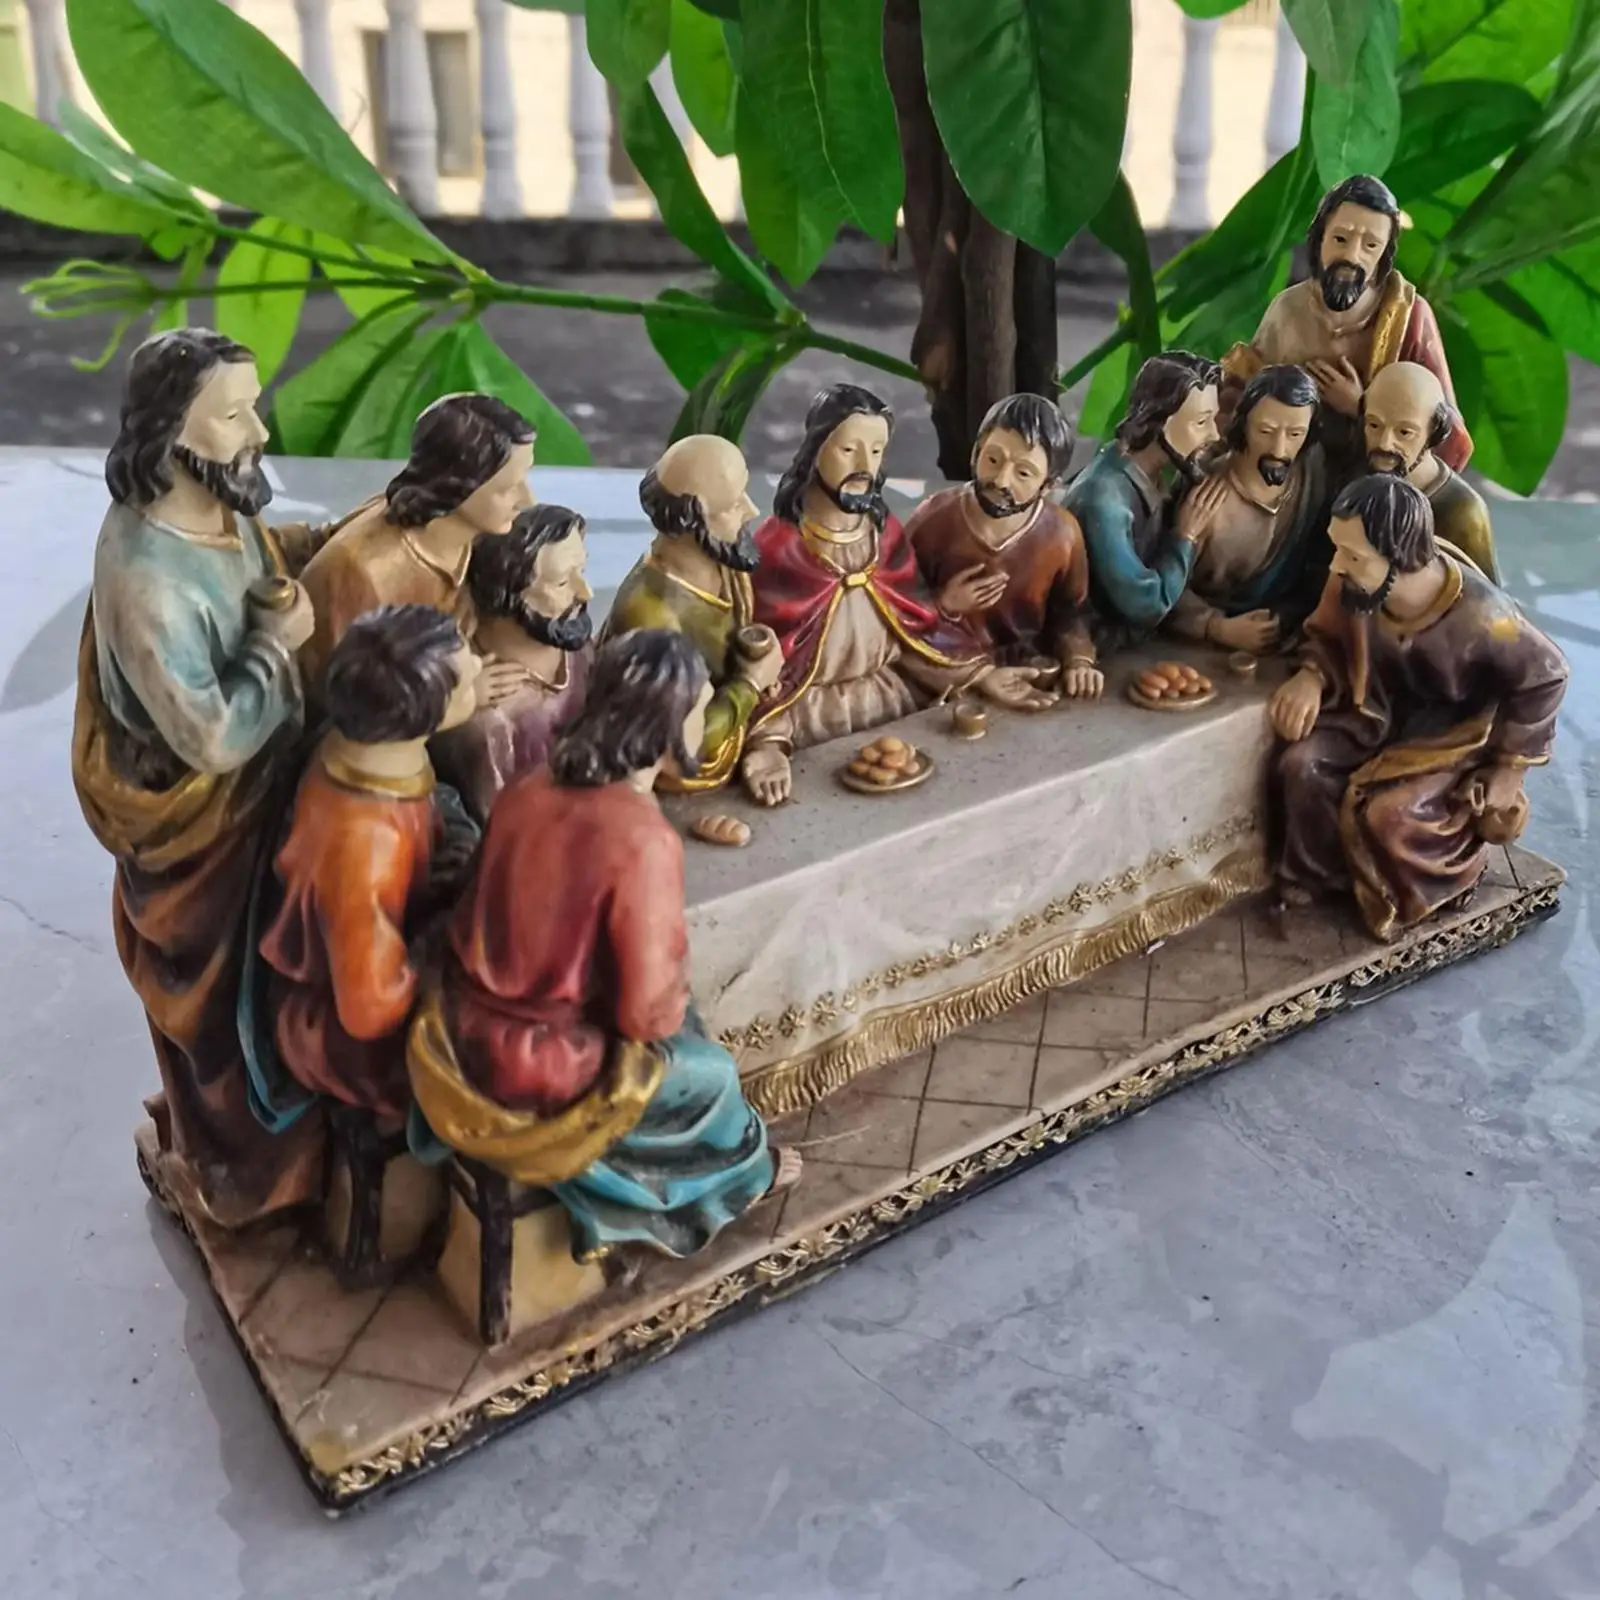 The Last Supper Decorative Statue for Office Ornaments Collection Gifts